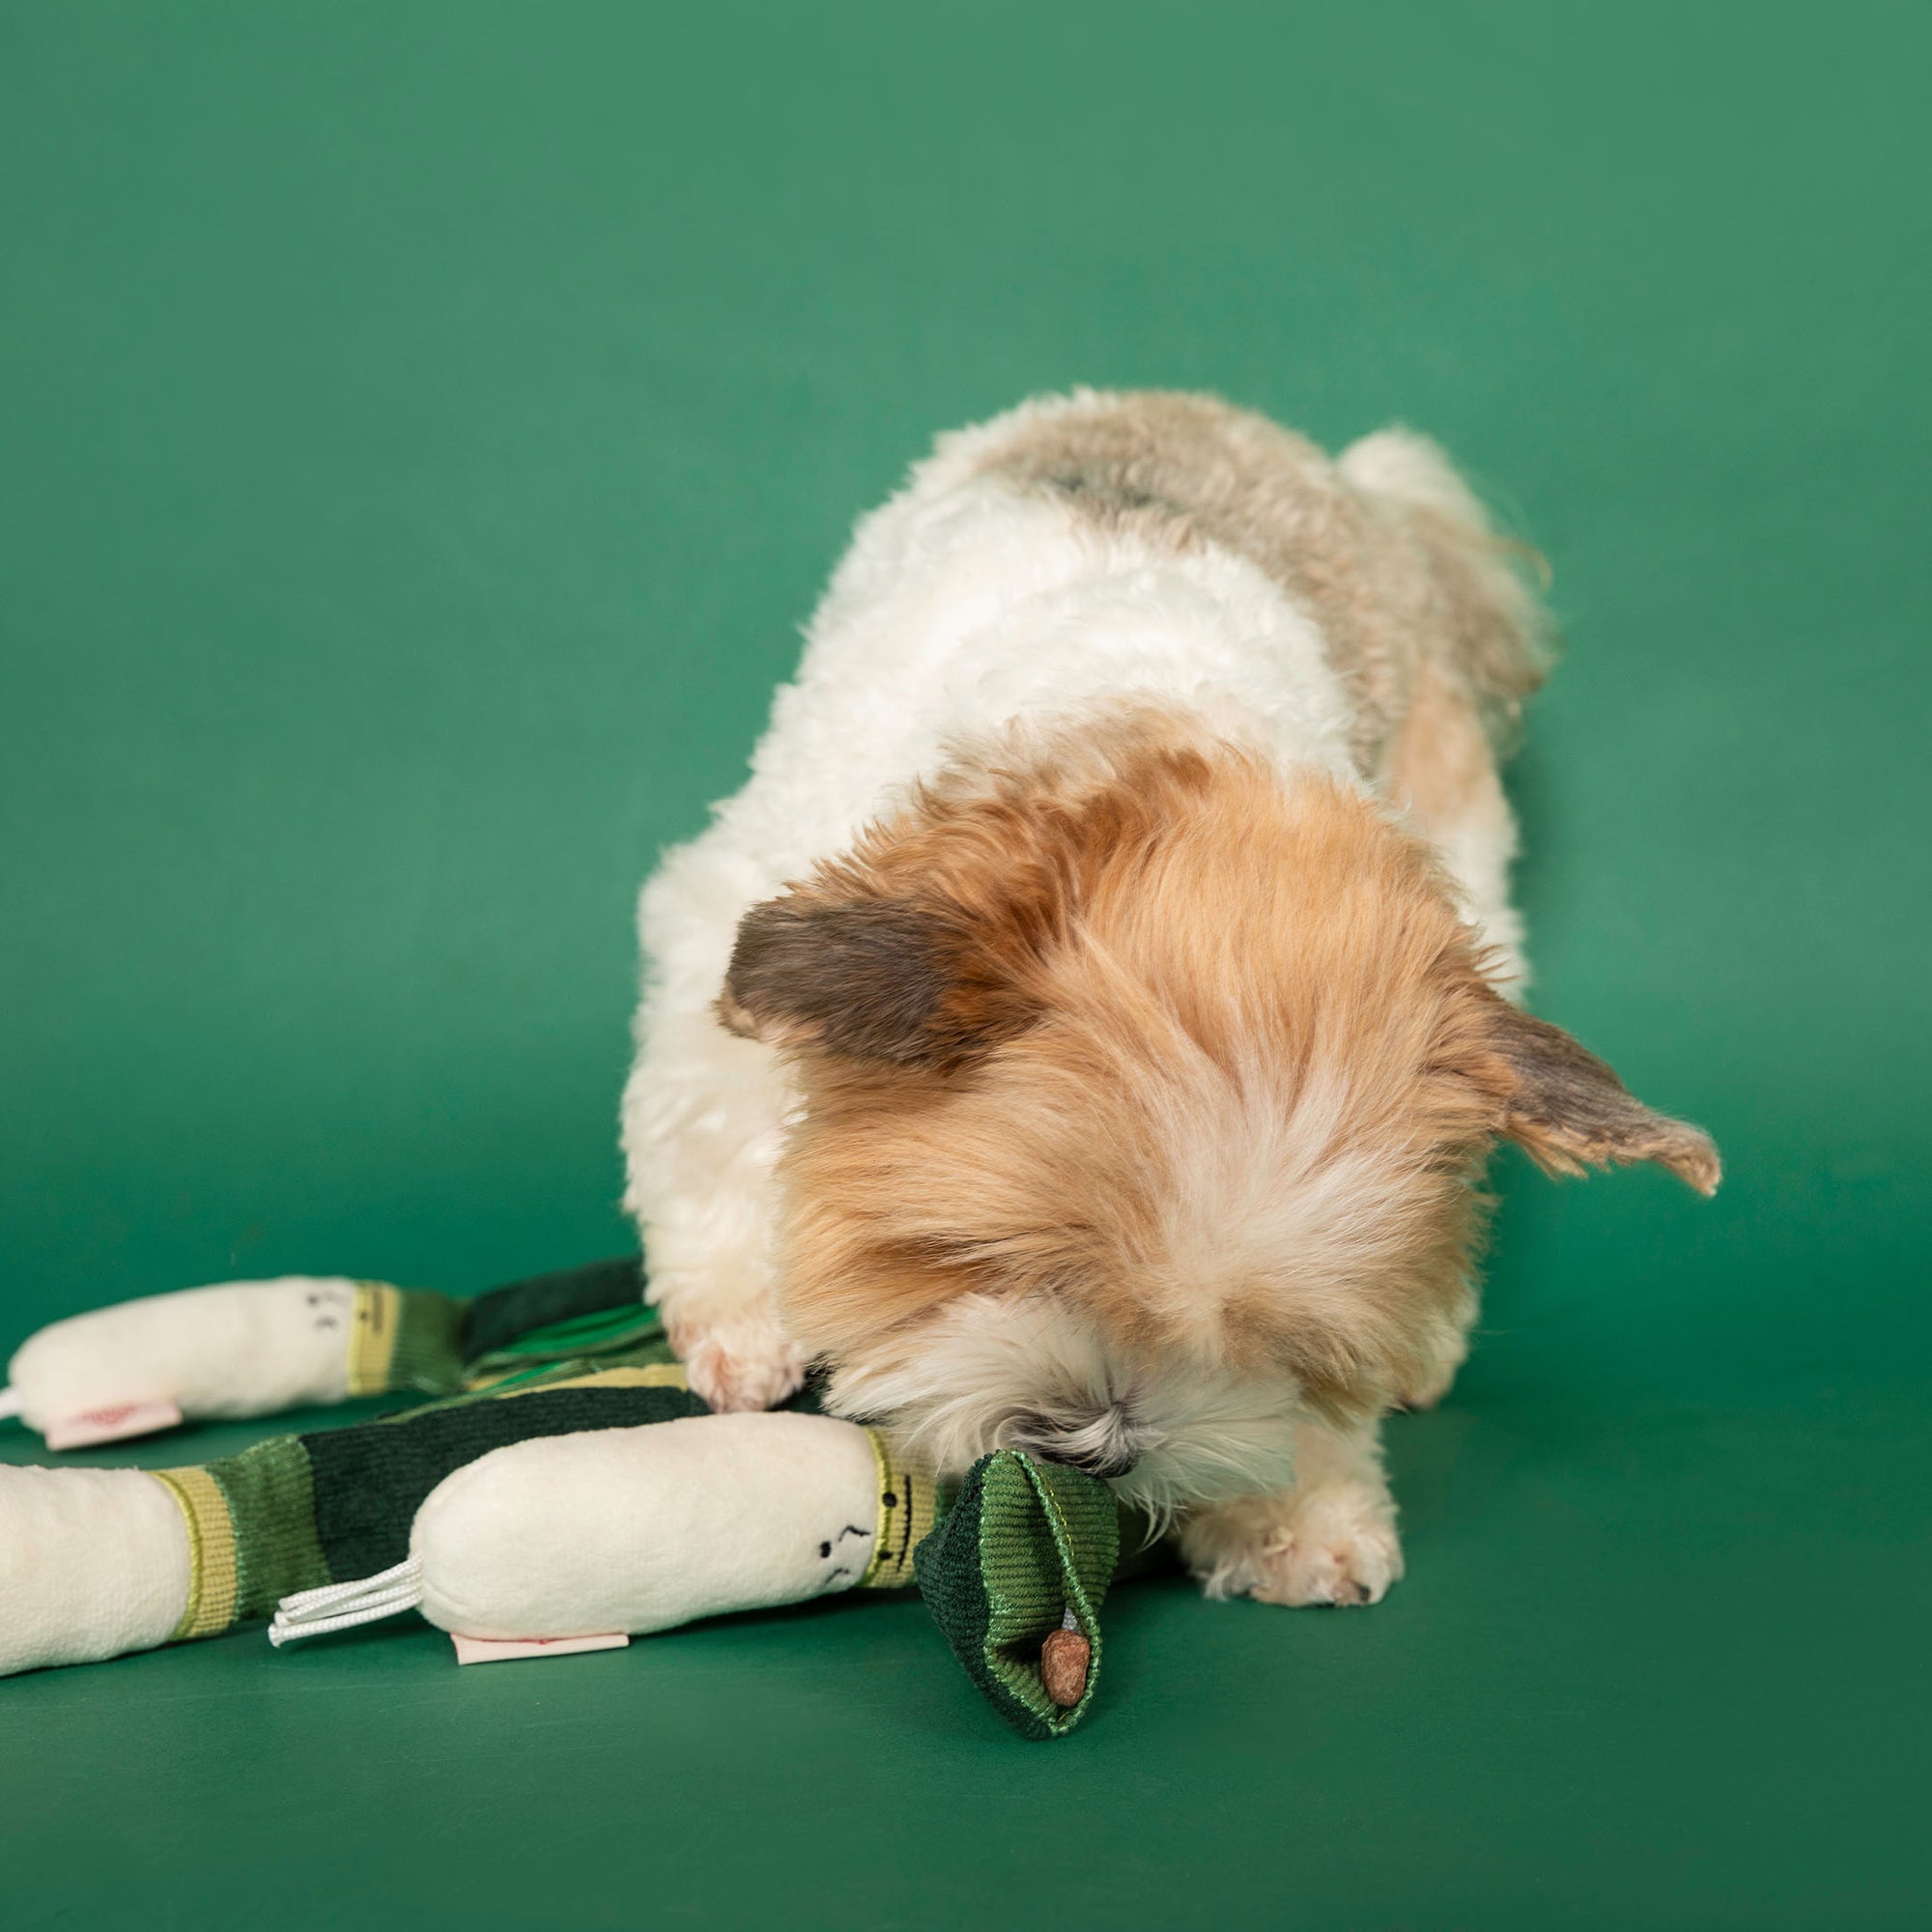 a small dog with a fluffy white and tan coat intently sniffing or biting a green onion-shaped dog toy. The toy is lying on the floor, and the dog's focus on it suggests a moment of discovery or the enjoyment of play, which is typical of engaging with a nosework toy designed for pets. The green background complements the green elements of the toy, highlighting the playful scene.